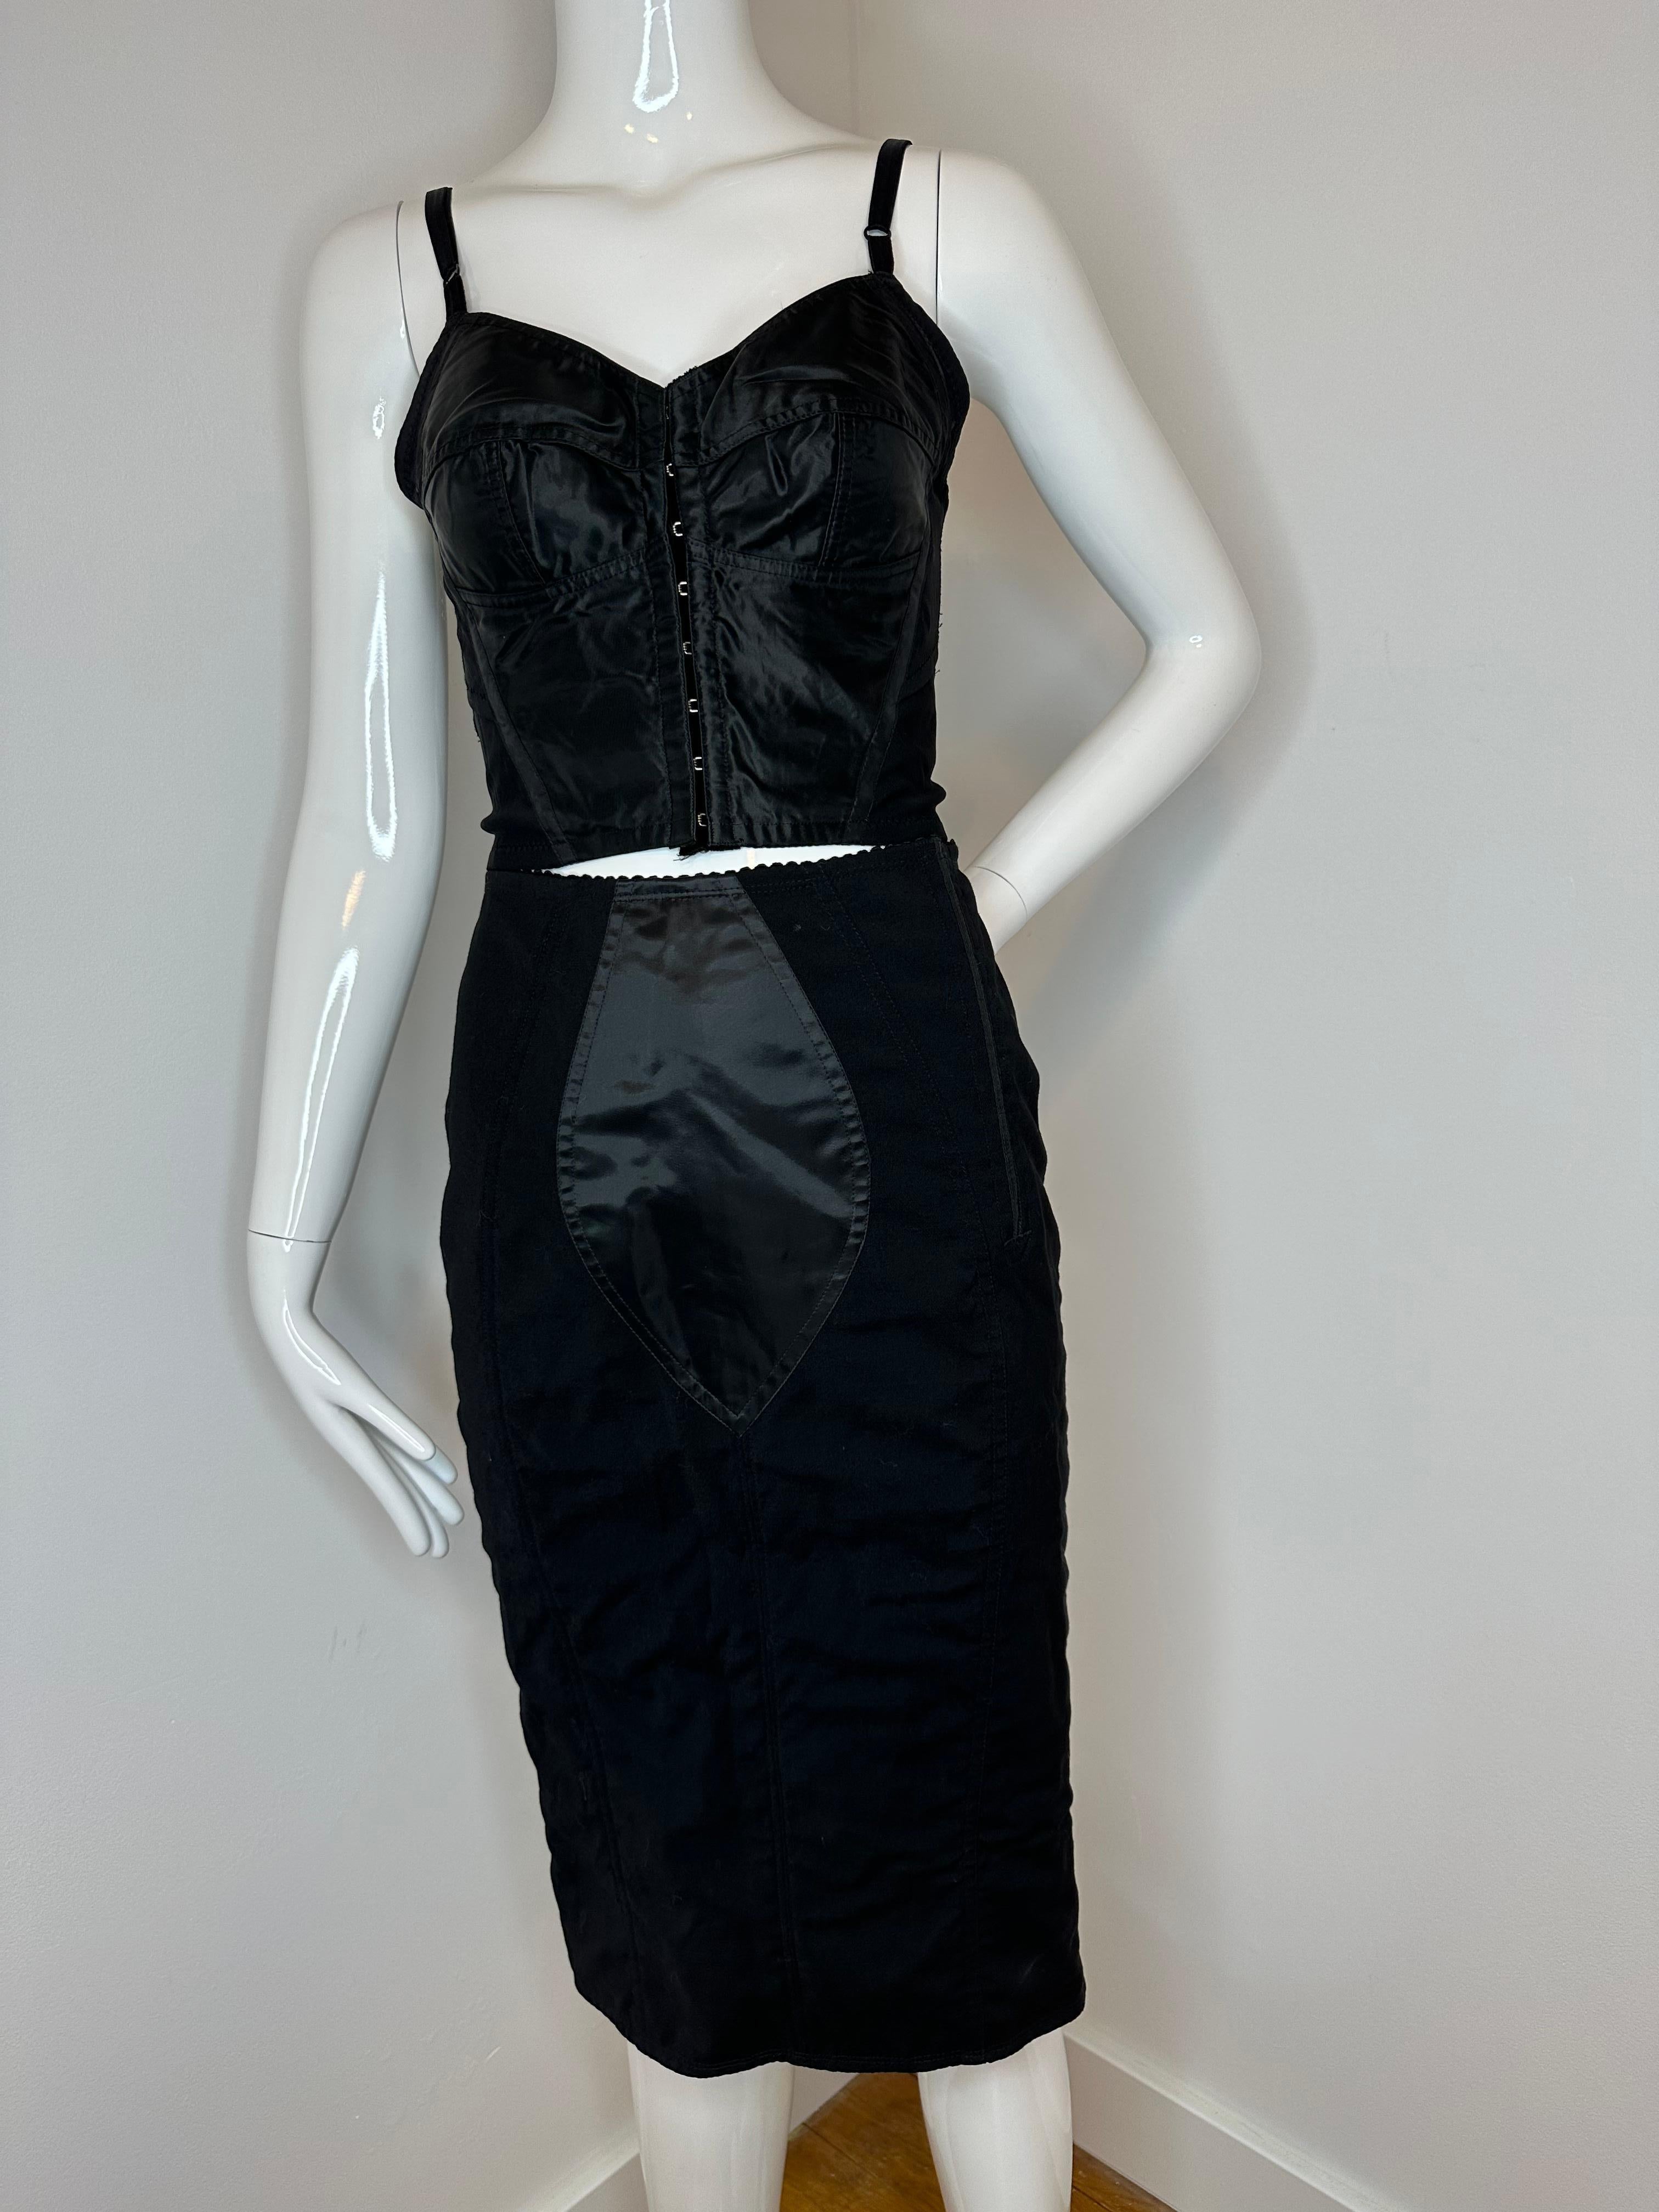 Dolce Gabbana rare 1992 bustier top 
Top size 42


Excellent vintage condition, no rips or stains